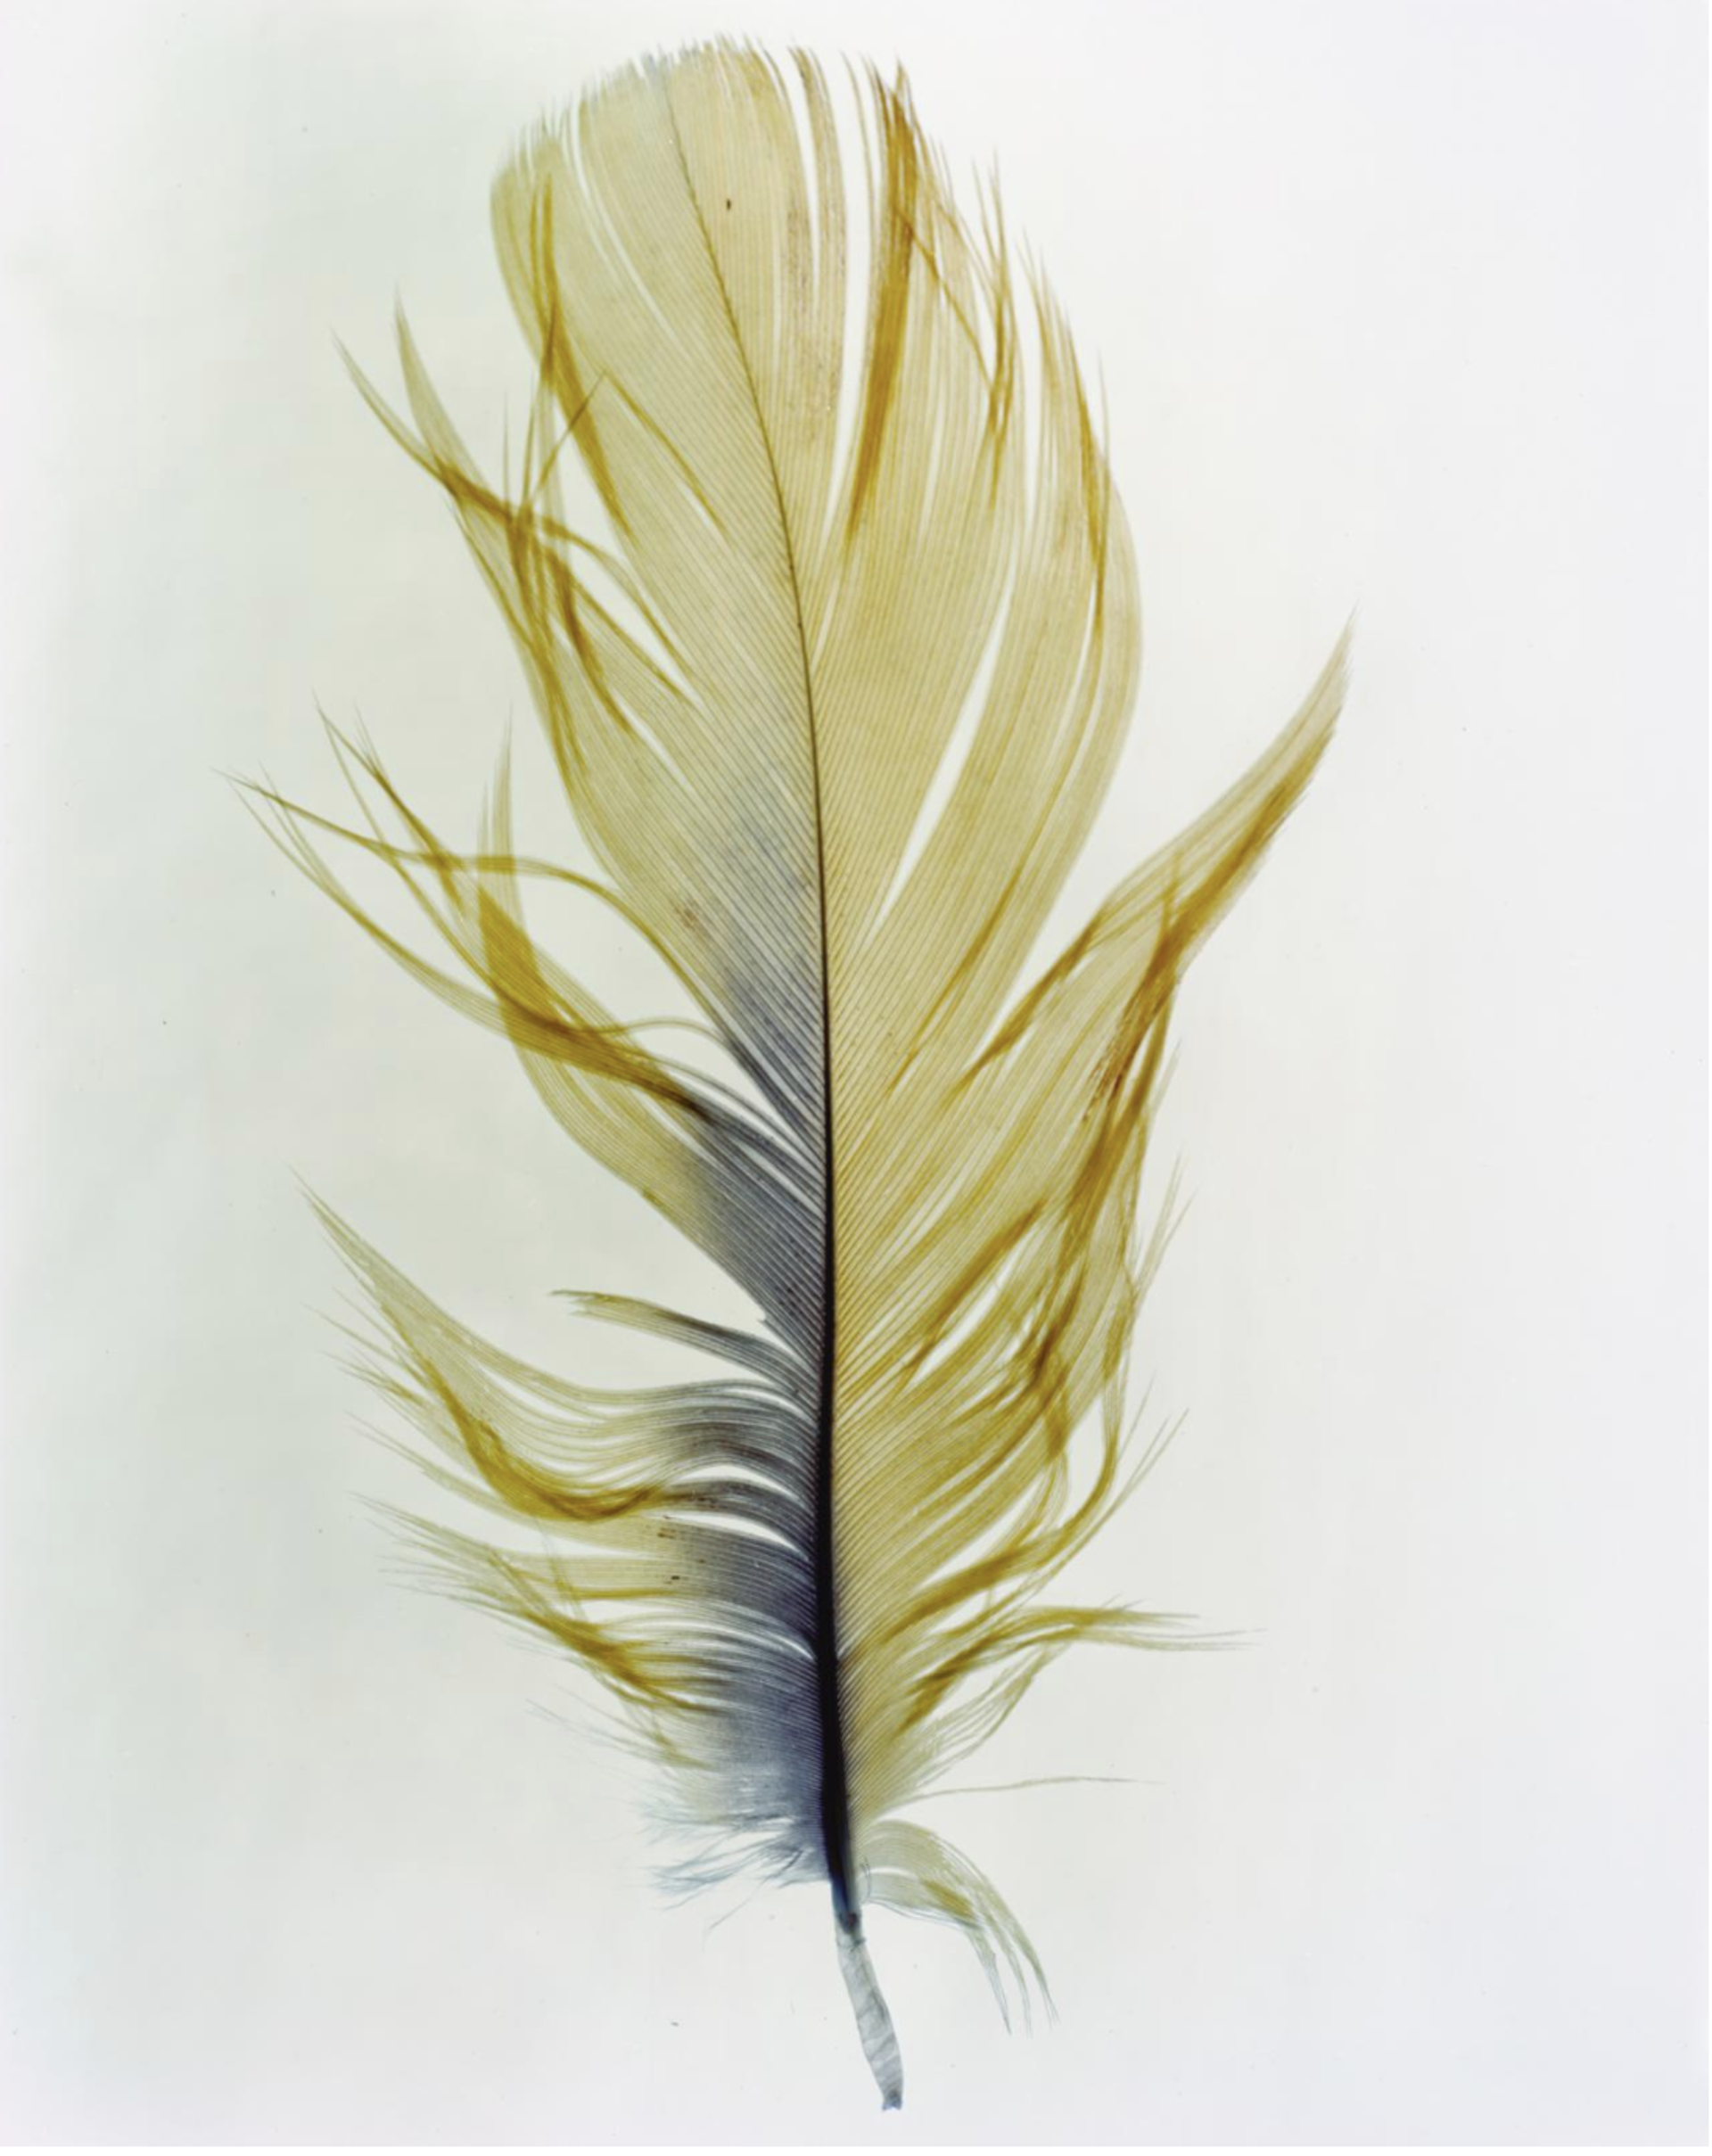 Feather Study No. 15  by Taylor Curry